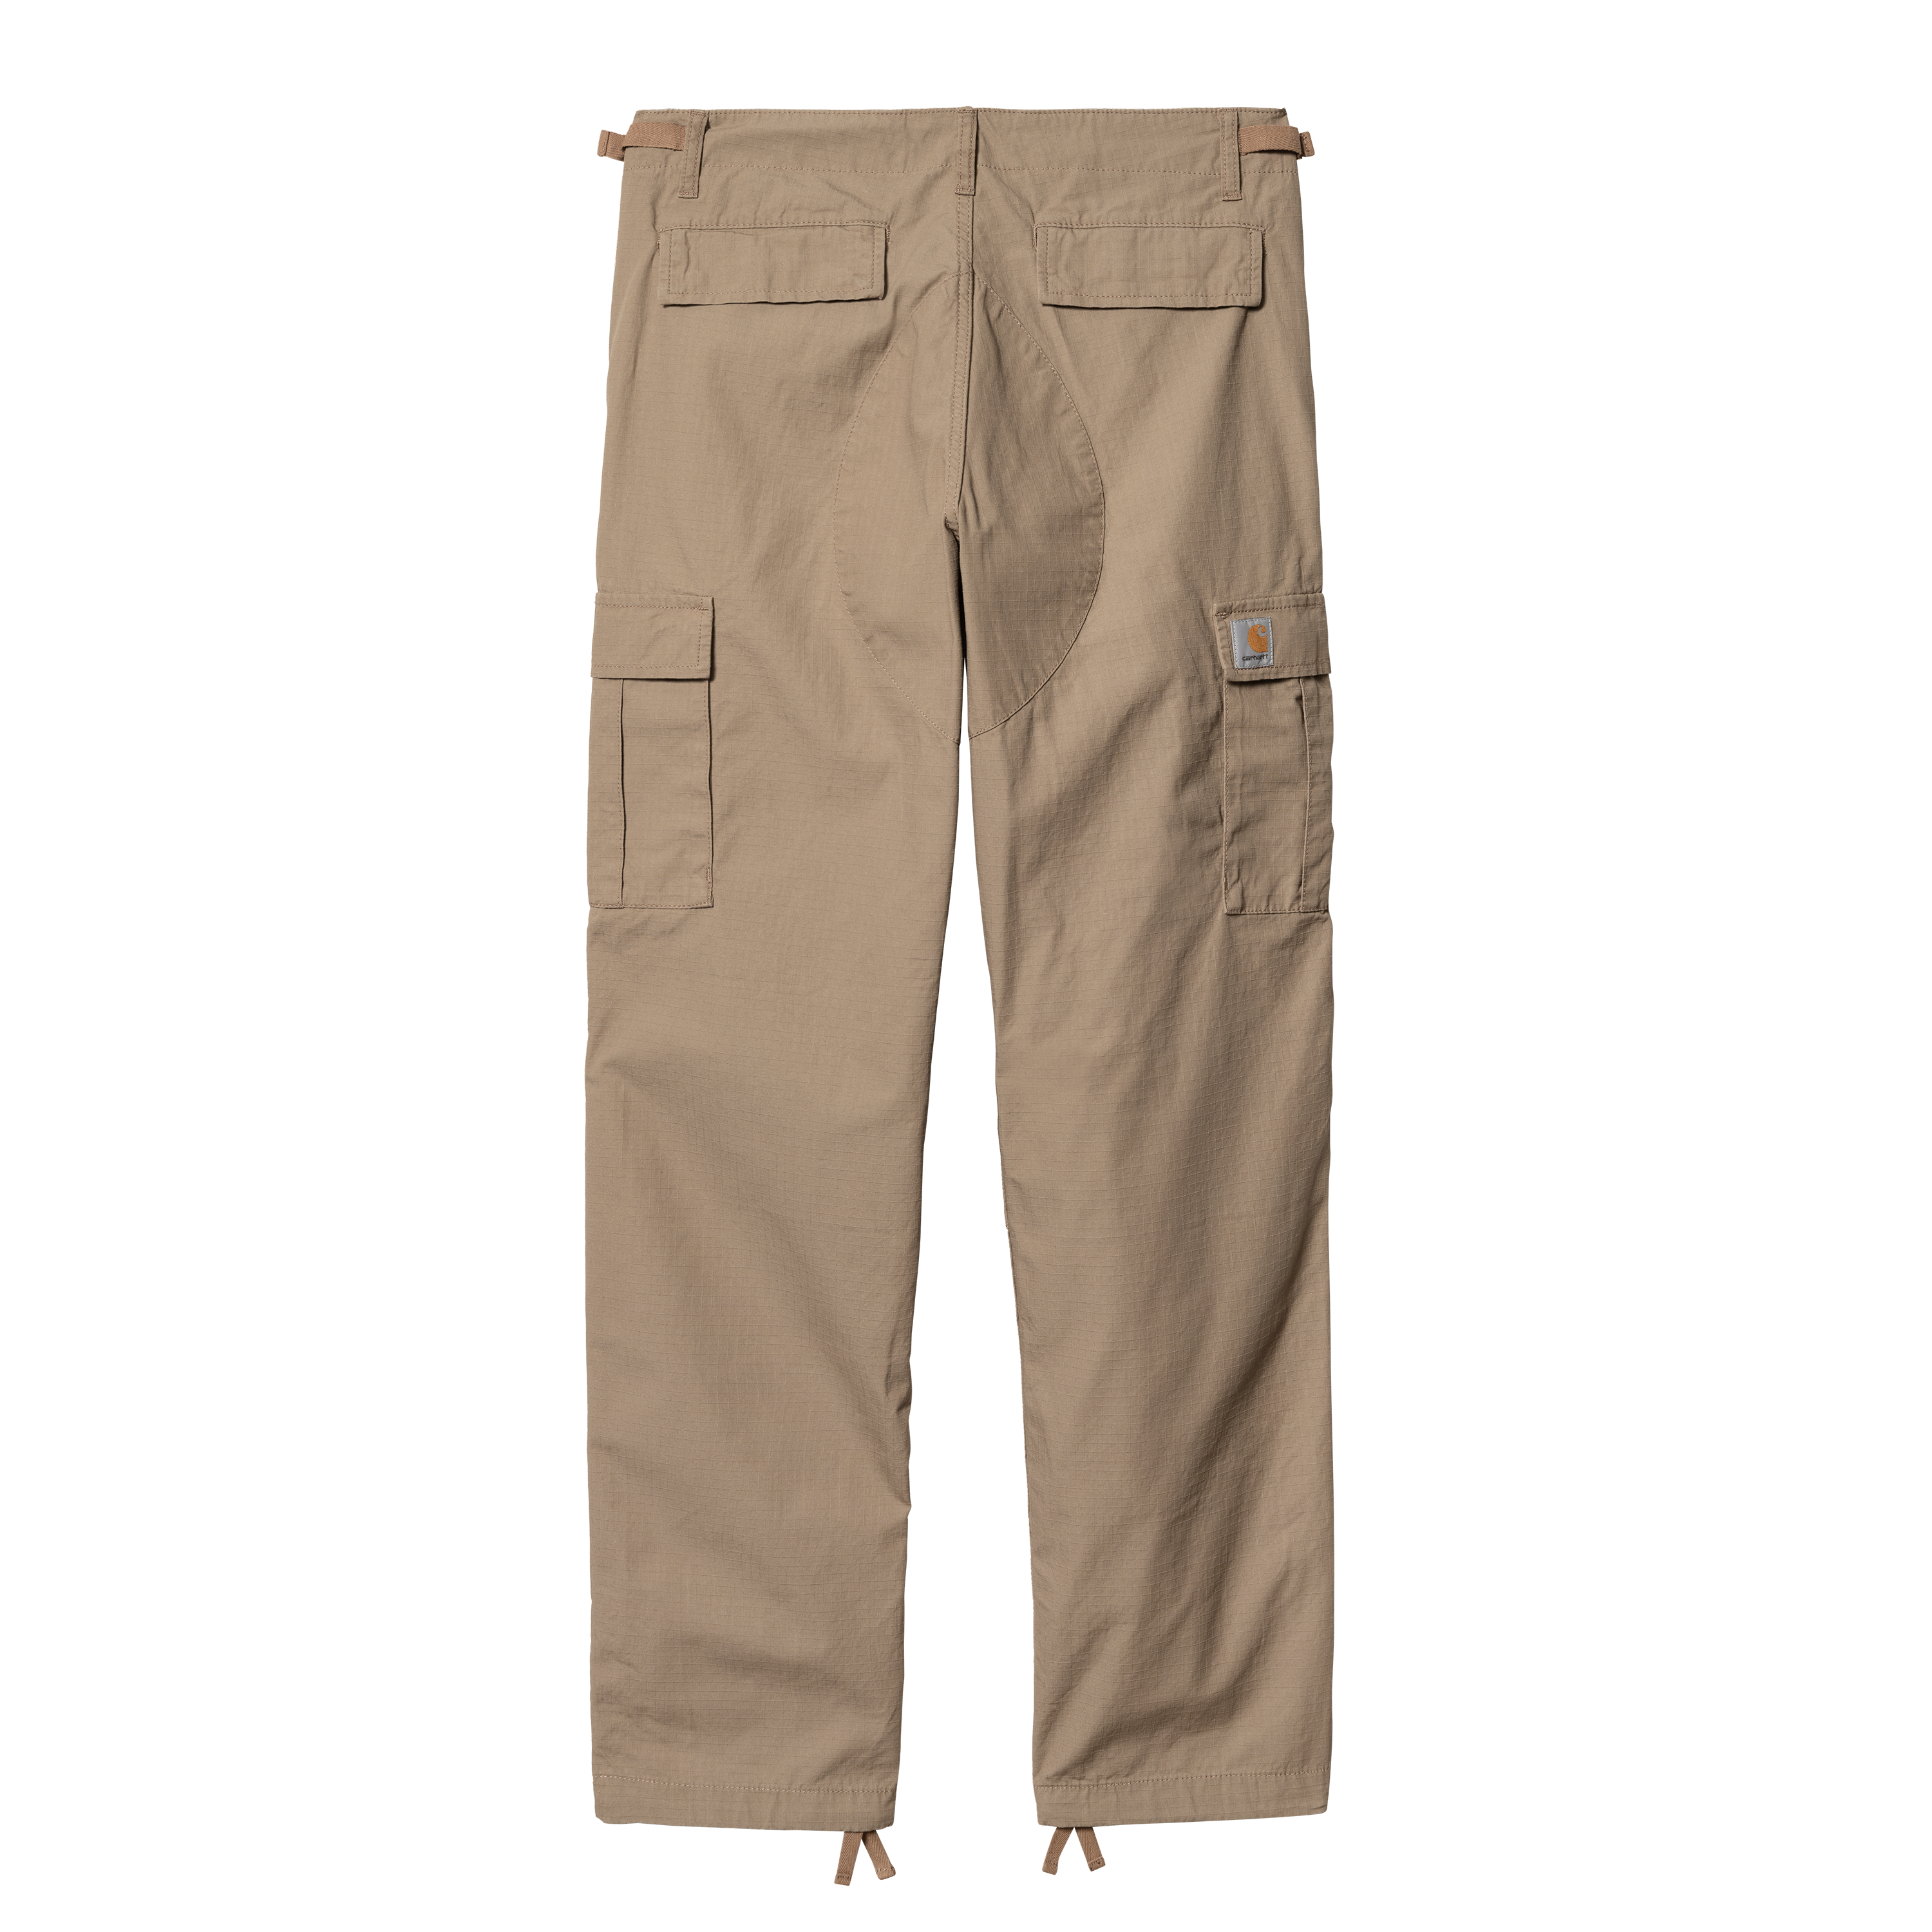 Carhartt Workwear 105491 Cargo Fleece Lined Work/Walking Trouser - Ripstop  material - Clothing from MI Supplies Limited UK